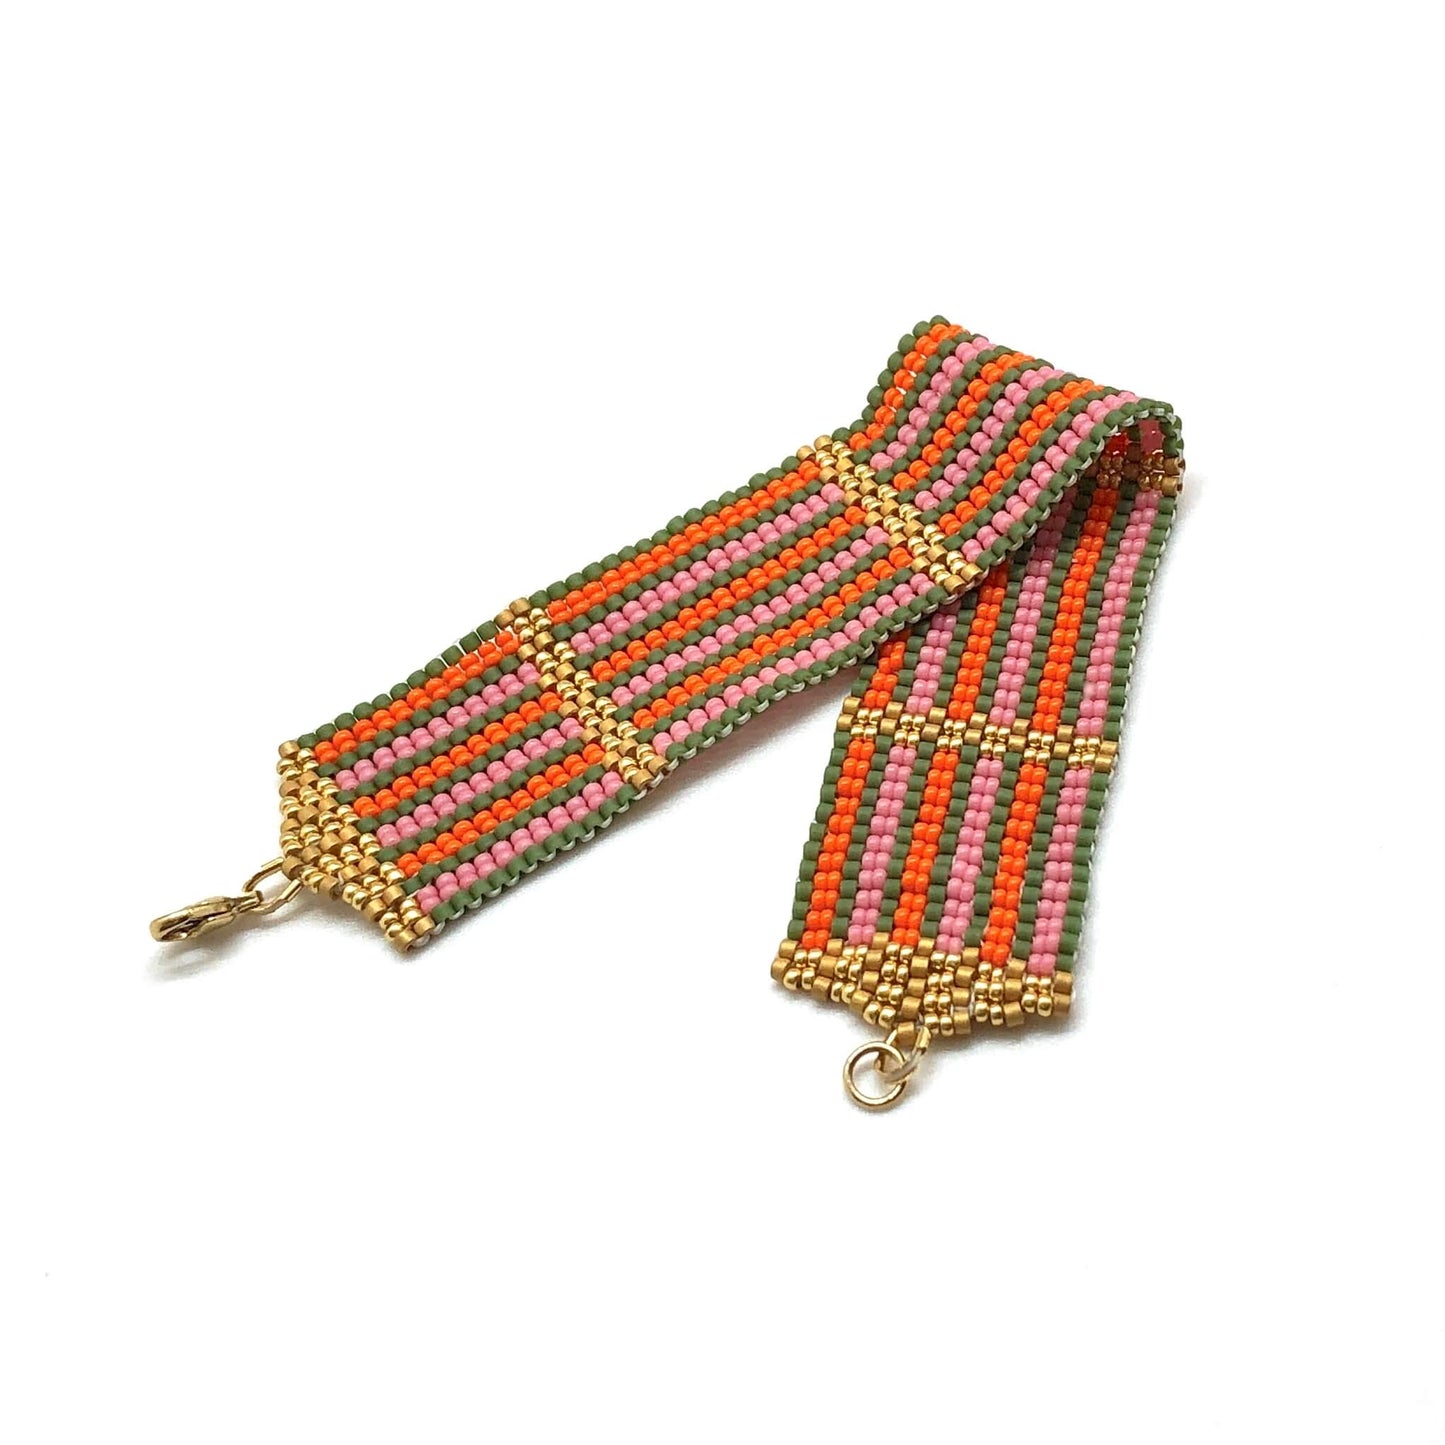 Pink, orange, and green stripes bright beaded bracelet cuff with gold tone accents. Hand woven in NYC. 14K gold filled lobster clasp.